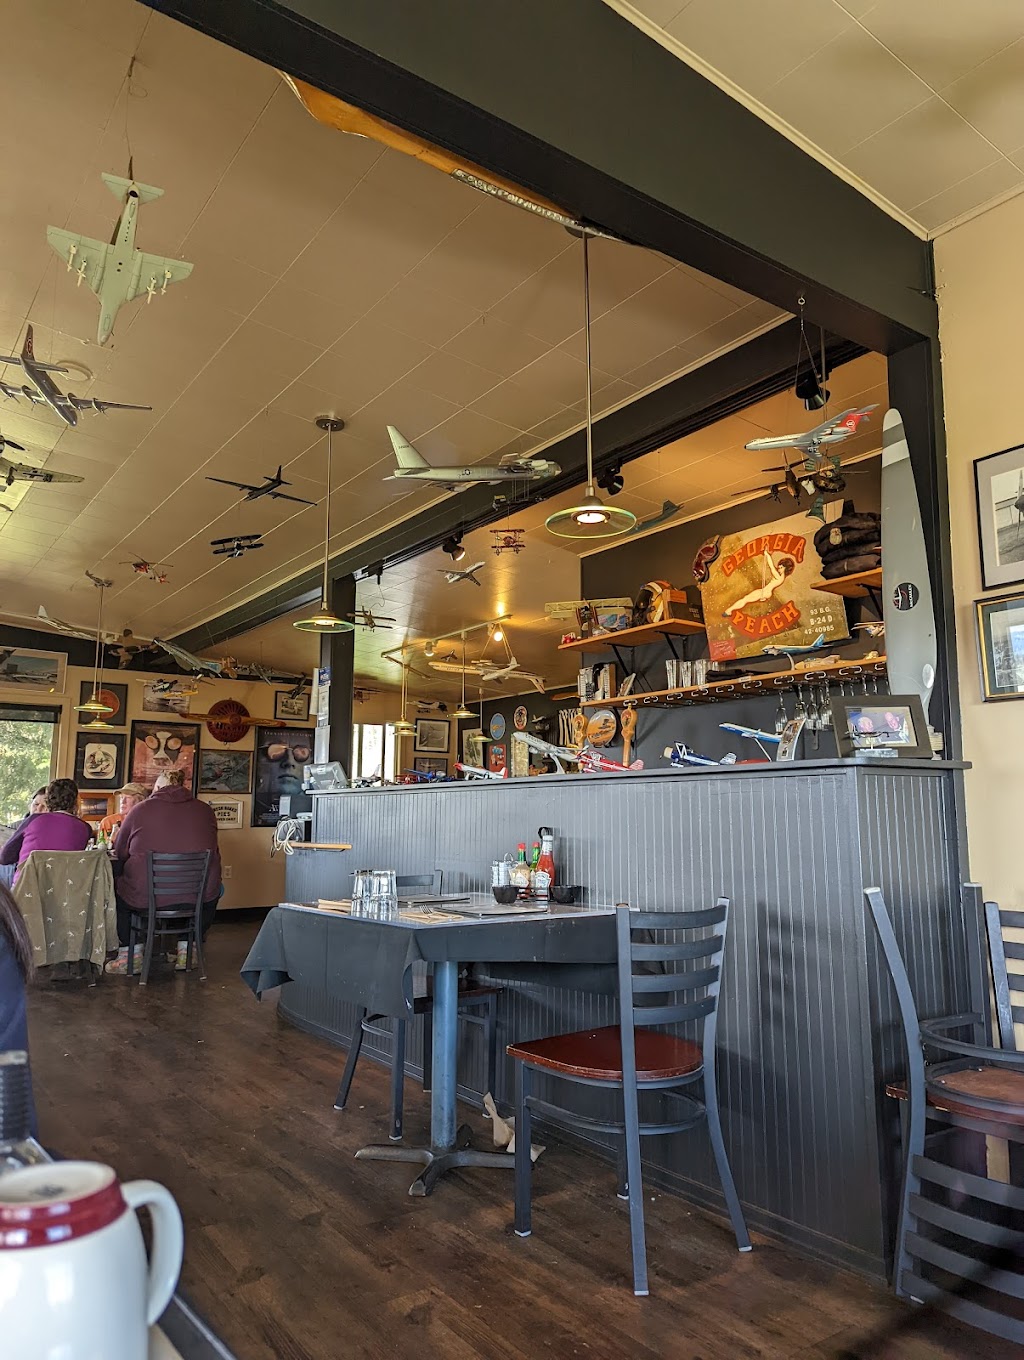 Spruce Goose Cafe | 302 Airport Rd, Port Townsend, WA 98368, USA | Phone: (360) 385-3185